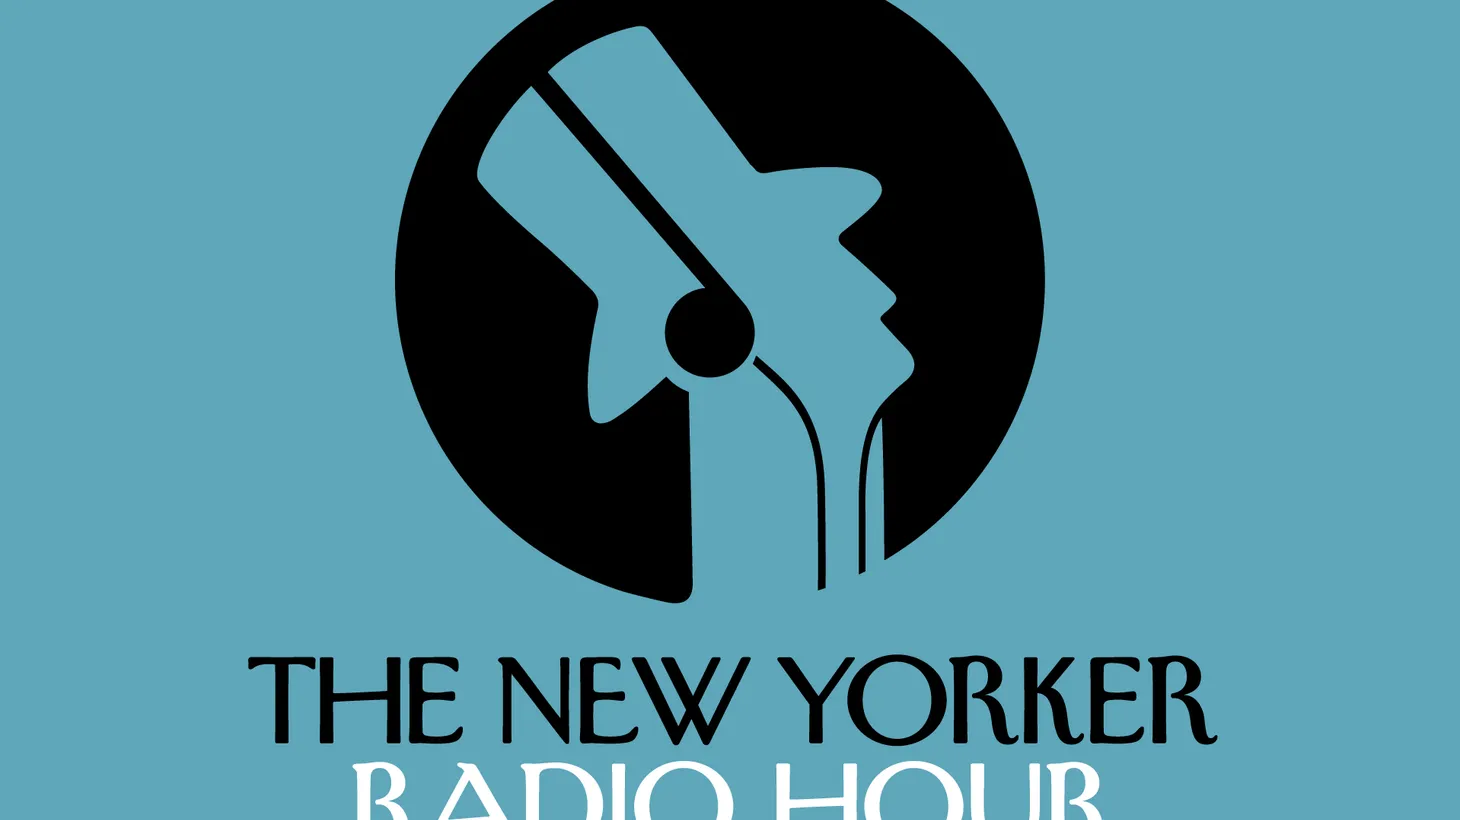 This week on the New Yorker Radio Hour, we look at sexual misconduct in politics — with the defeat of Roy Moore, the resignation of Al Franken, and the Democratic Party's unfinished business with Bill Clinton.